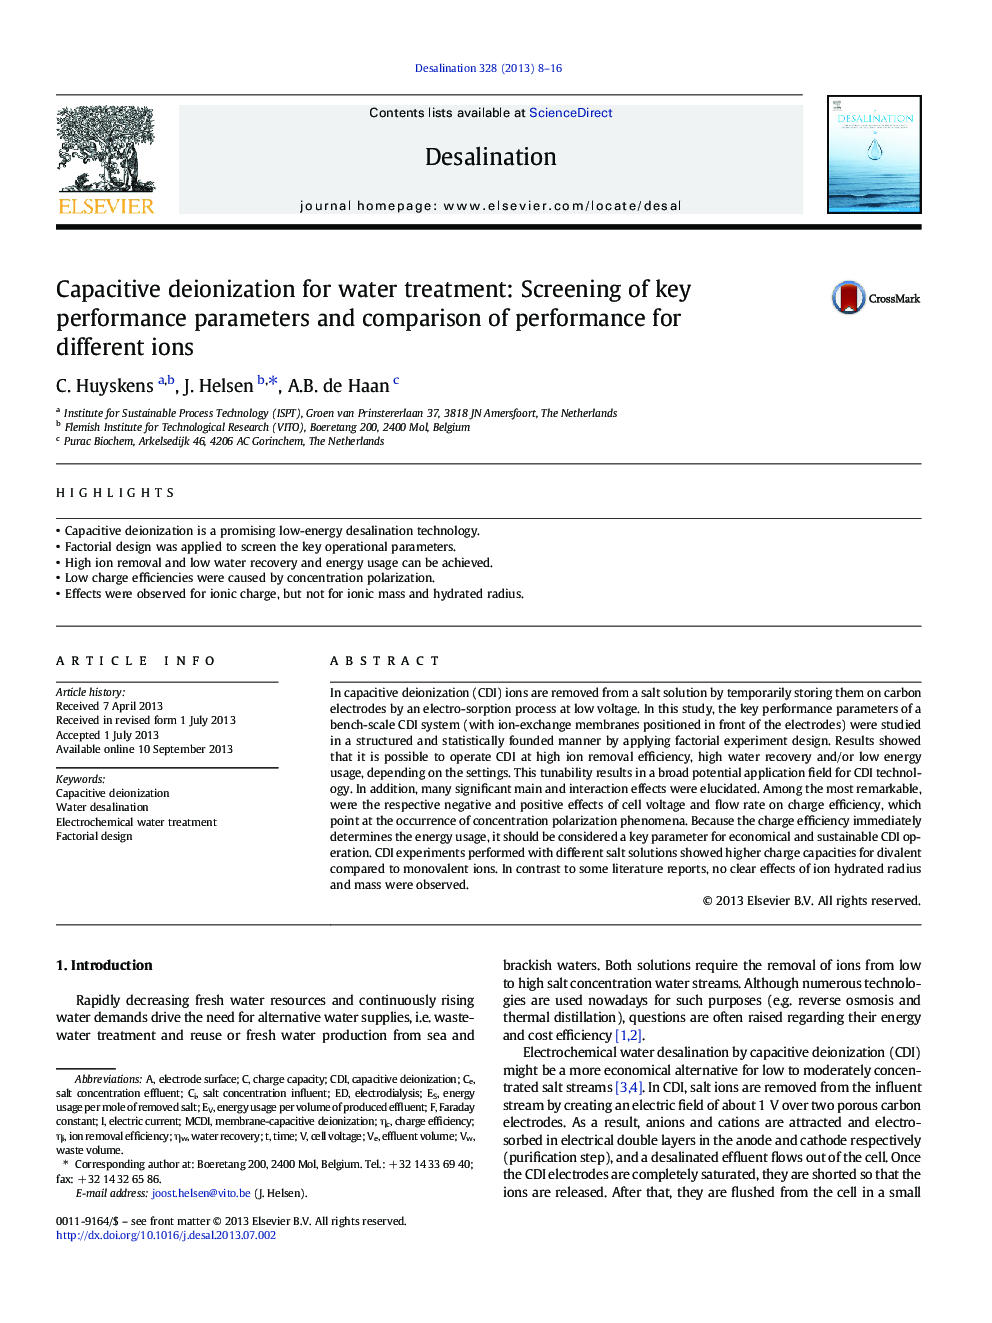 Capacitive deionization for water treatment: Screening of key performance parameters and comparison of performance for different ions